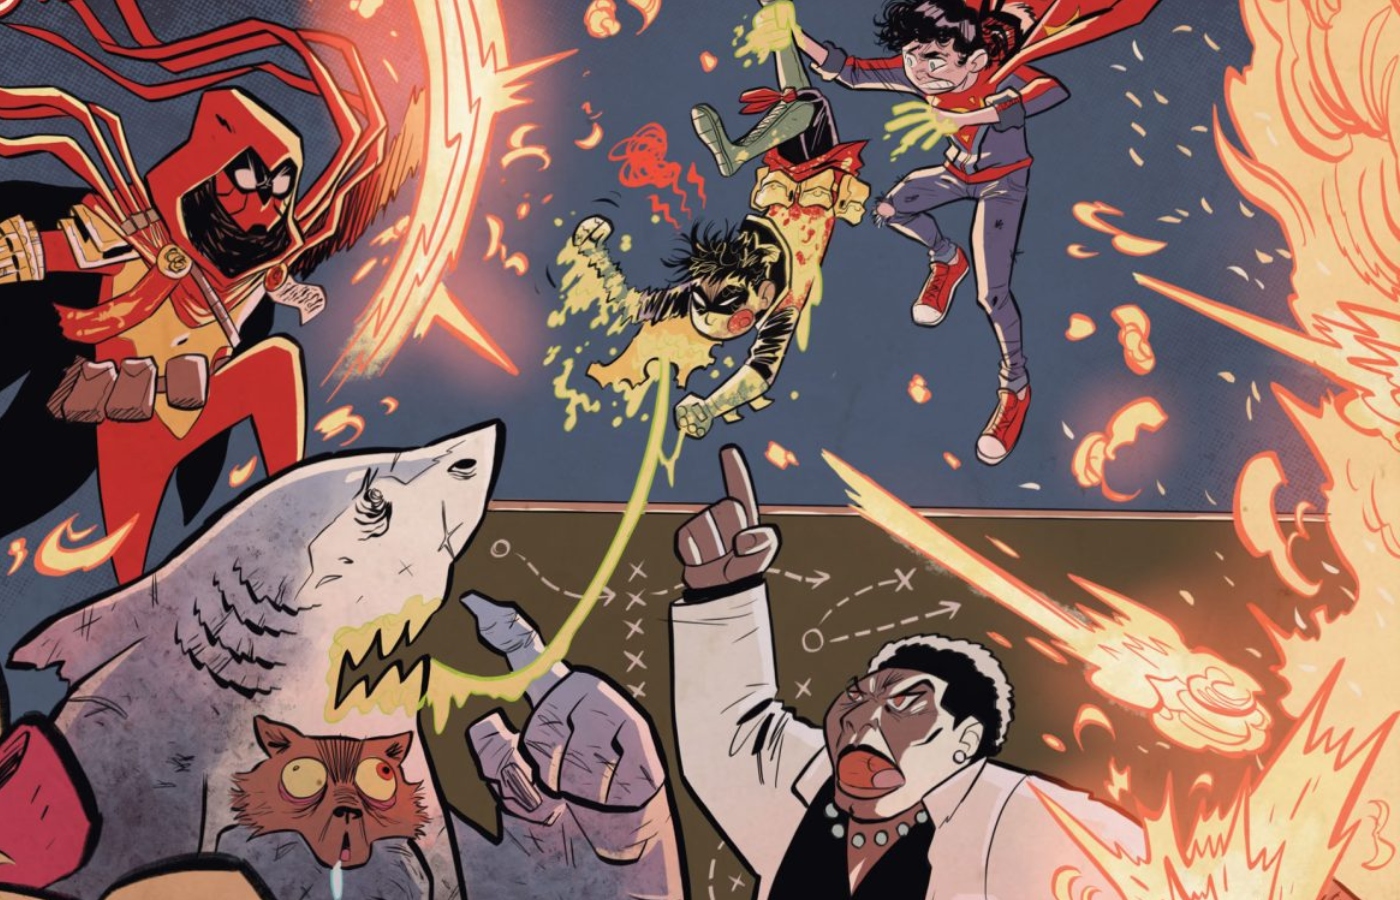 'Saved by the Belle Reve' #1 balances silly little jokes with sincere life lessons